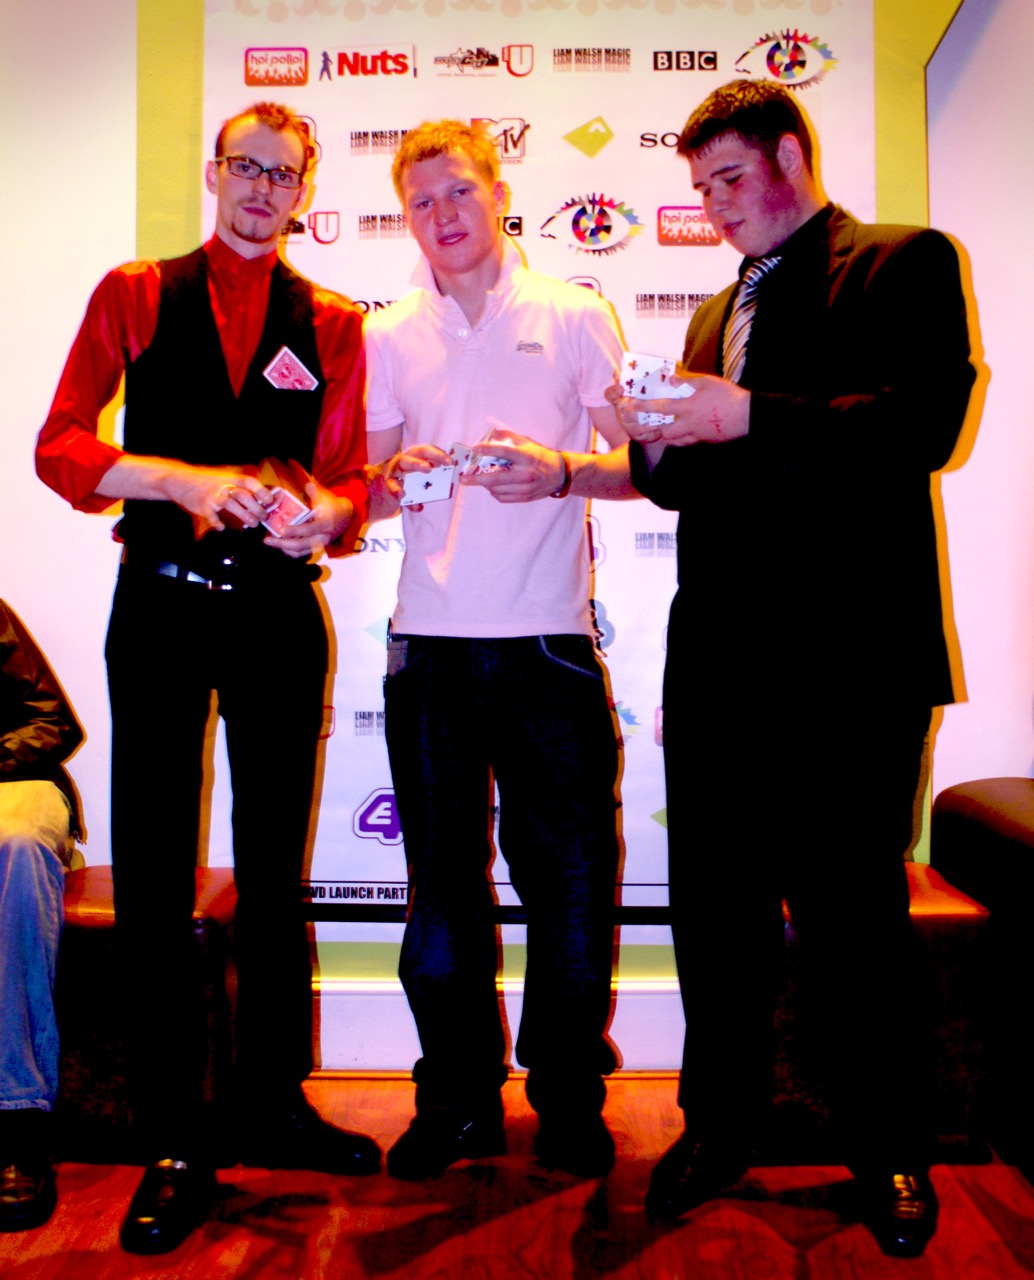 Street Magician Liam Walsh performing close up magic at DVD Launch Party in Brighton